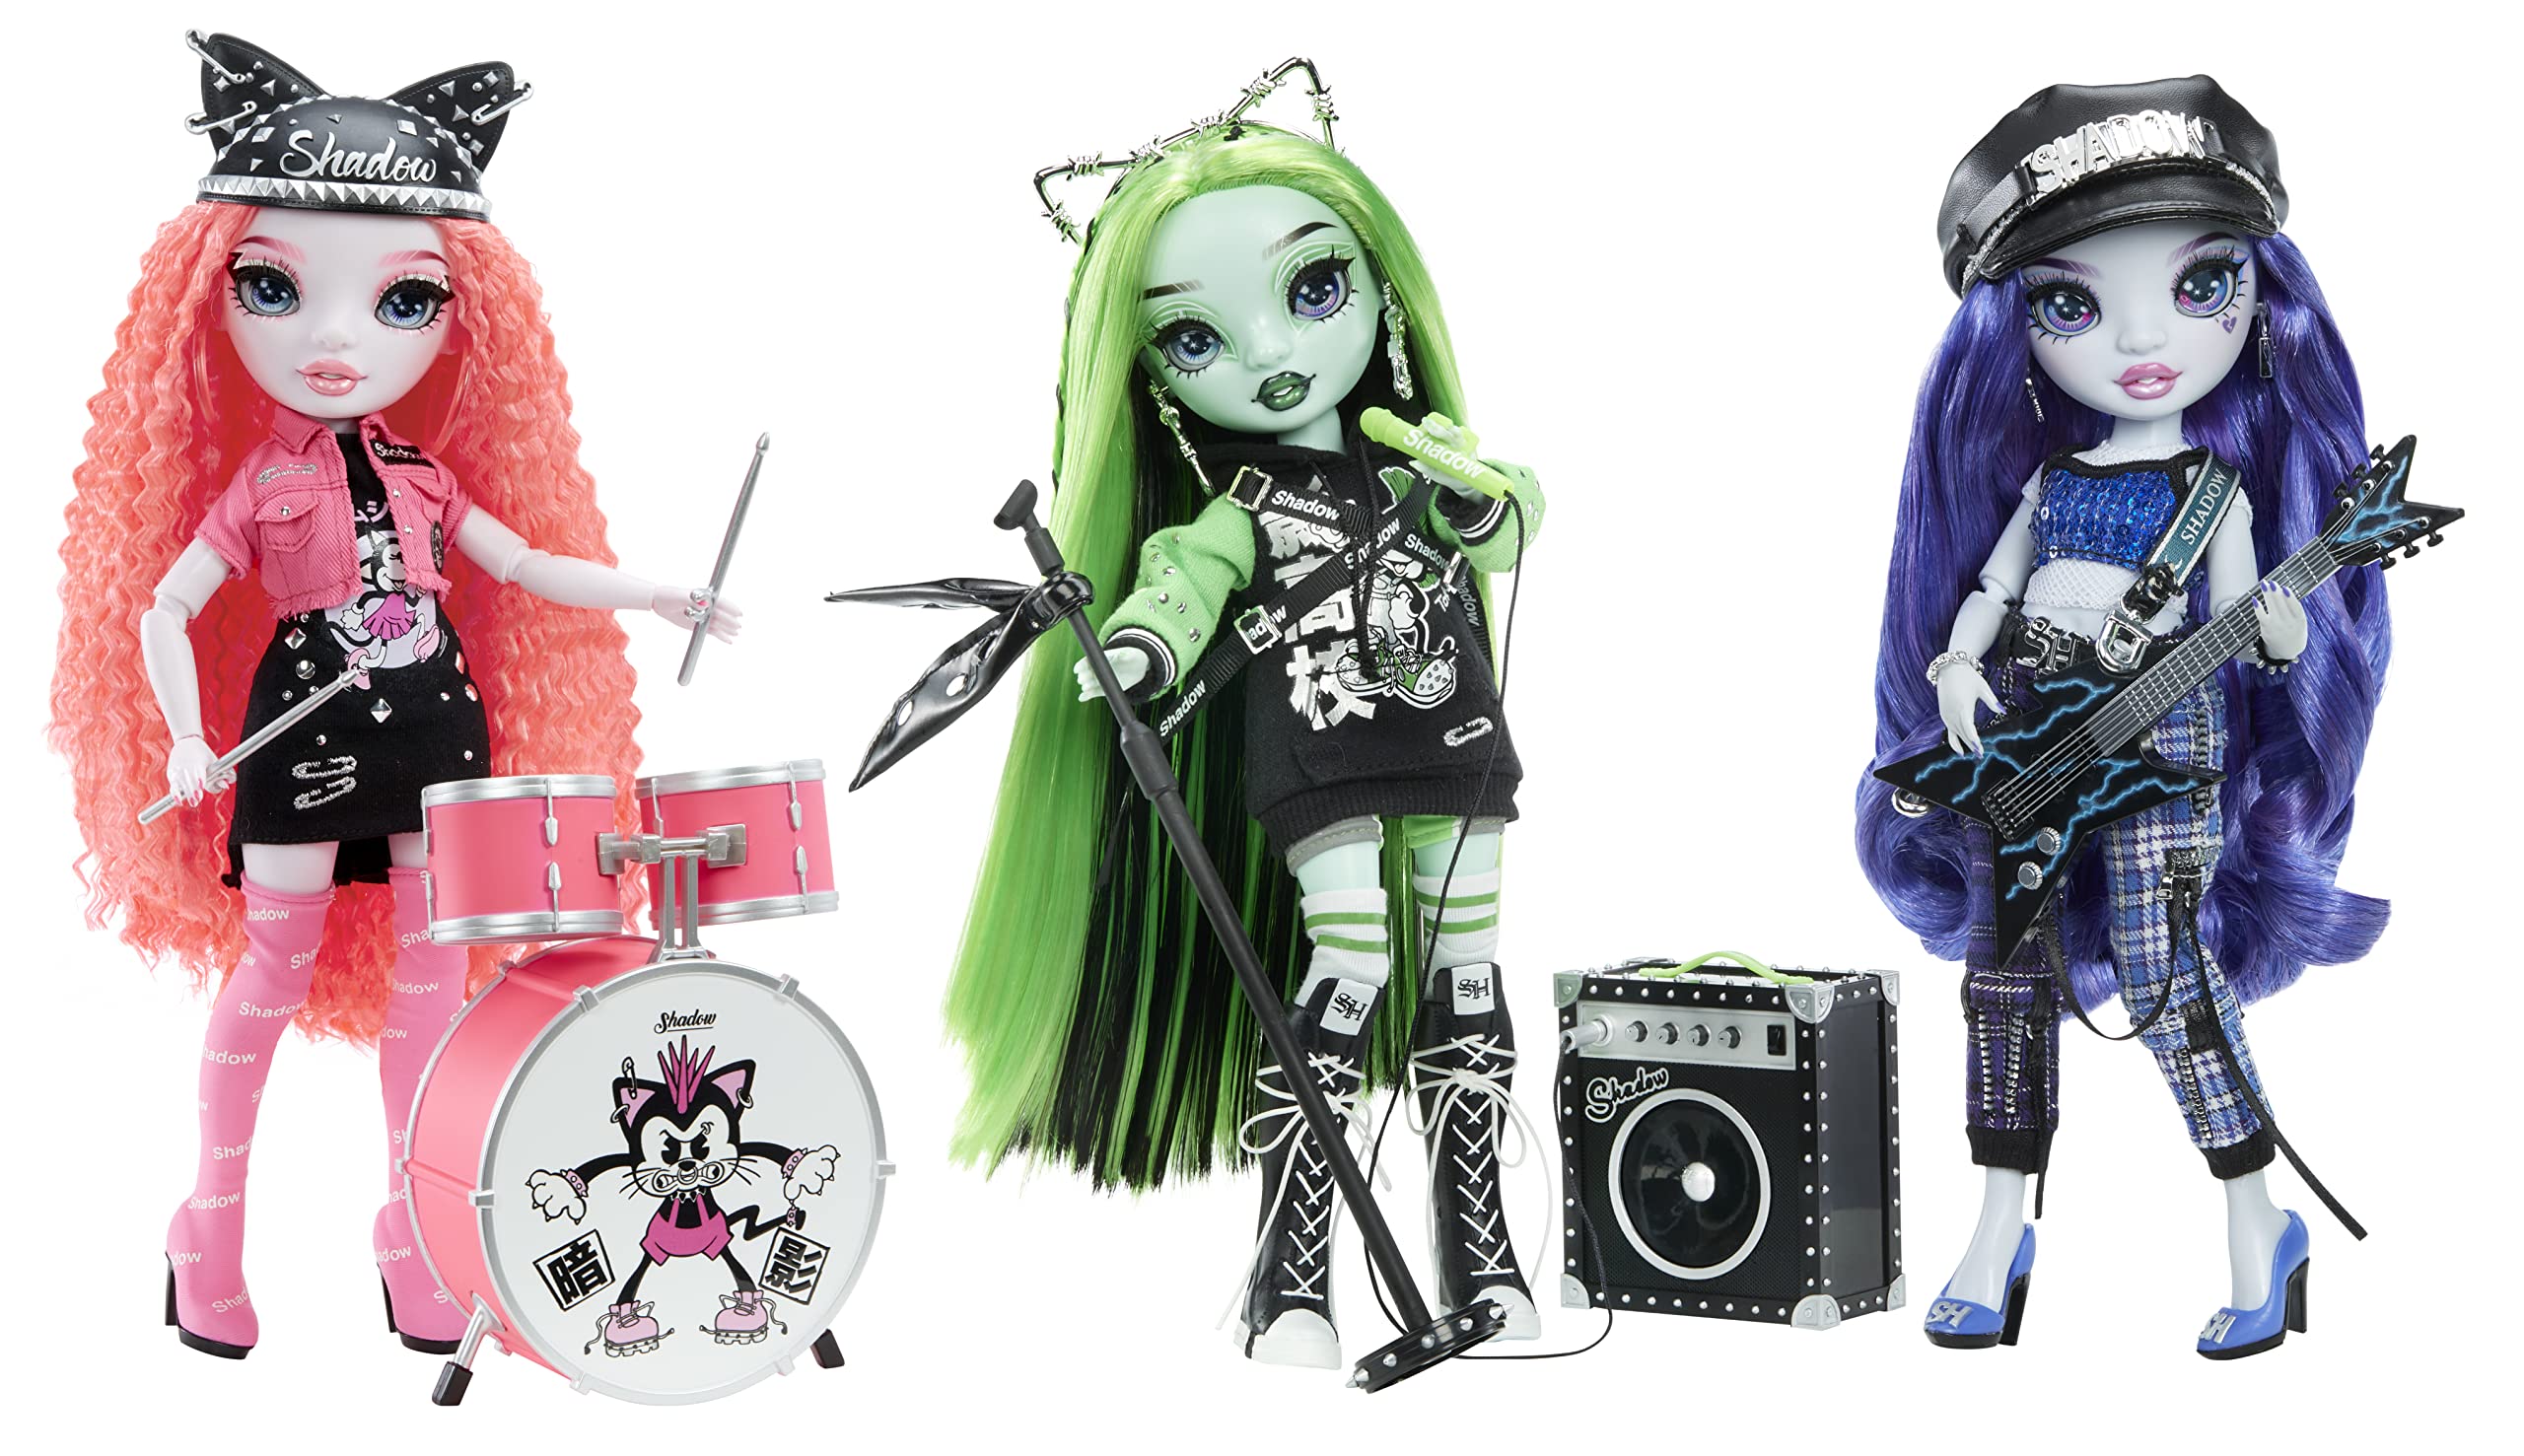 Rainbow Vision Shadow High Neon Shadow - Uma Vanhoose (Neon Blue) Posable Fashion Doll. 2 Designer Outfits to Mix & Match, Rock Band Accessories Playset, Great Toy Gift for Kids 6-12 Years & Collector